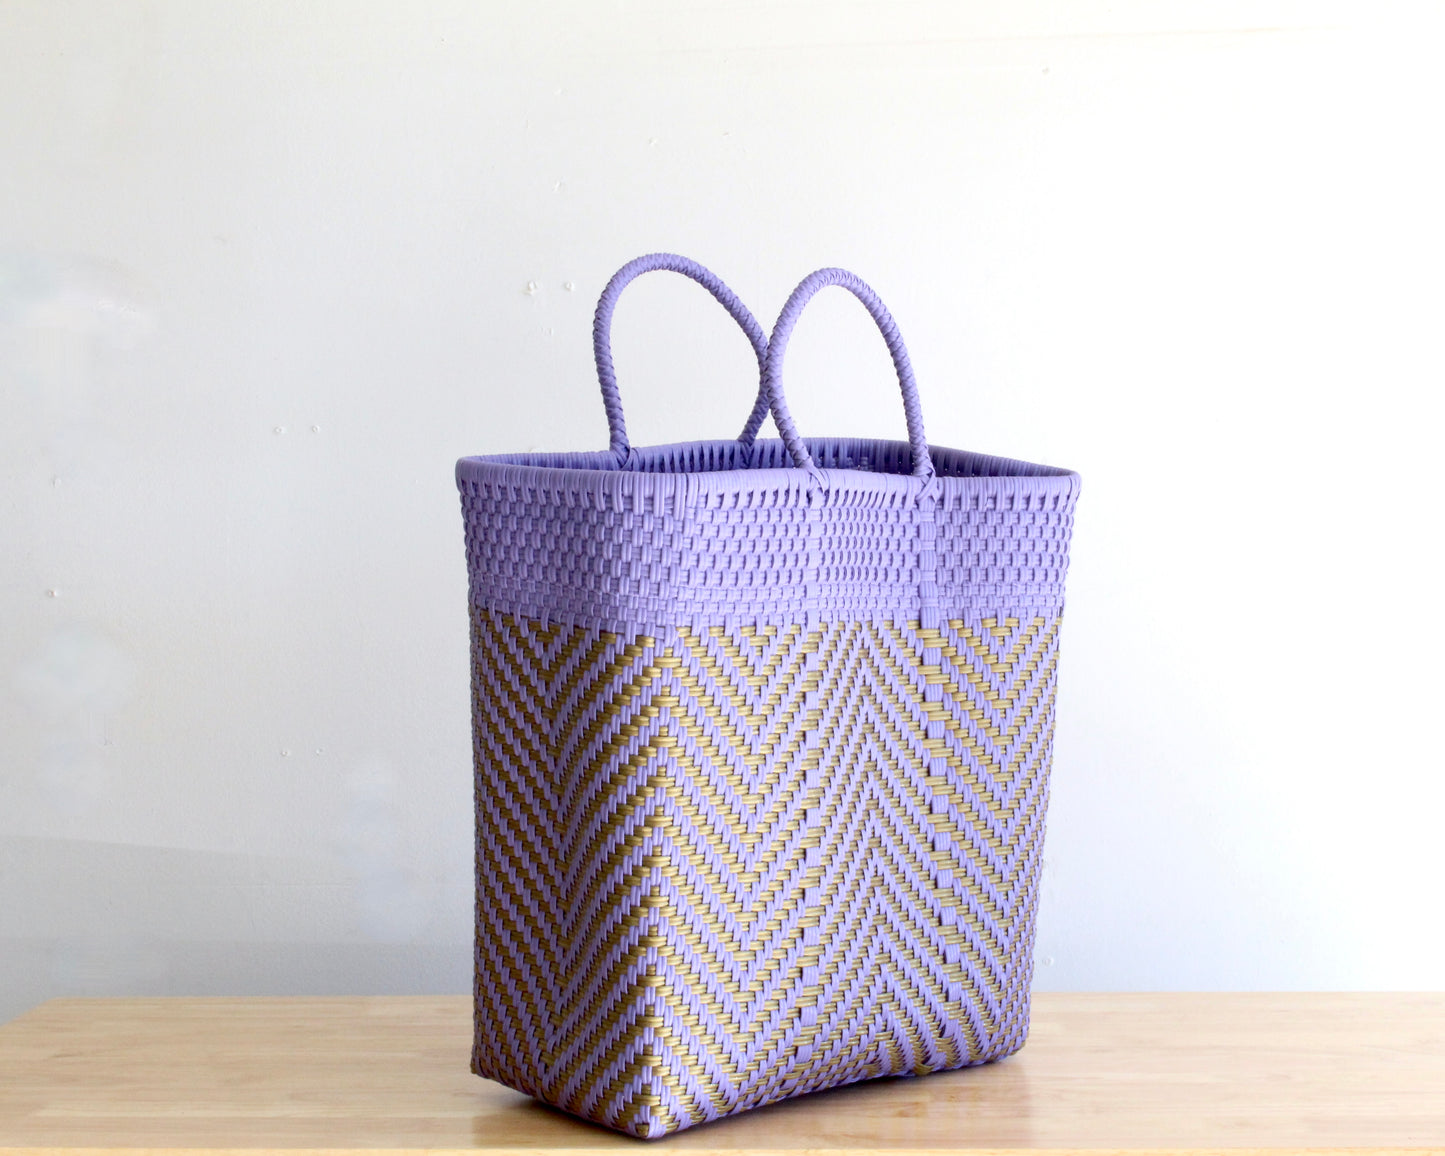 Violet & Gold Tote Bag by MexiMexi